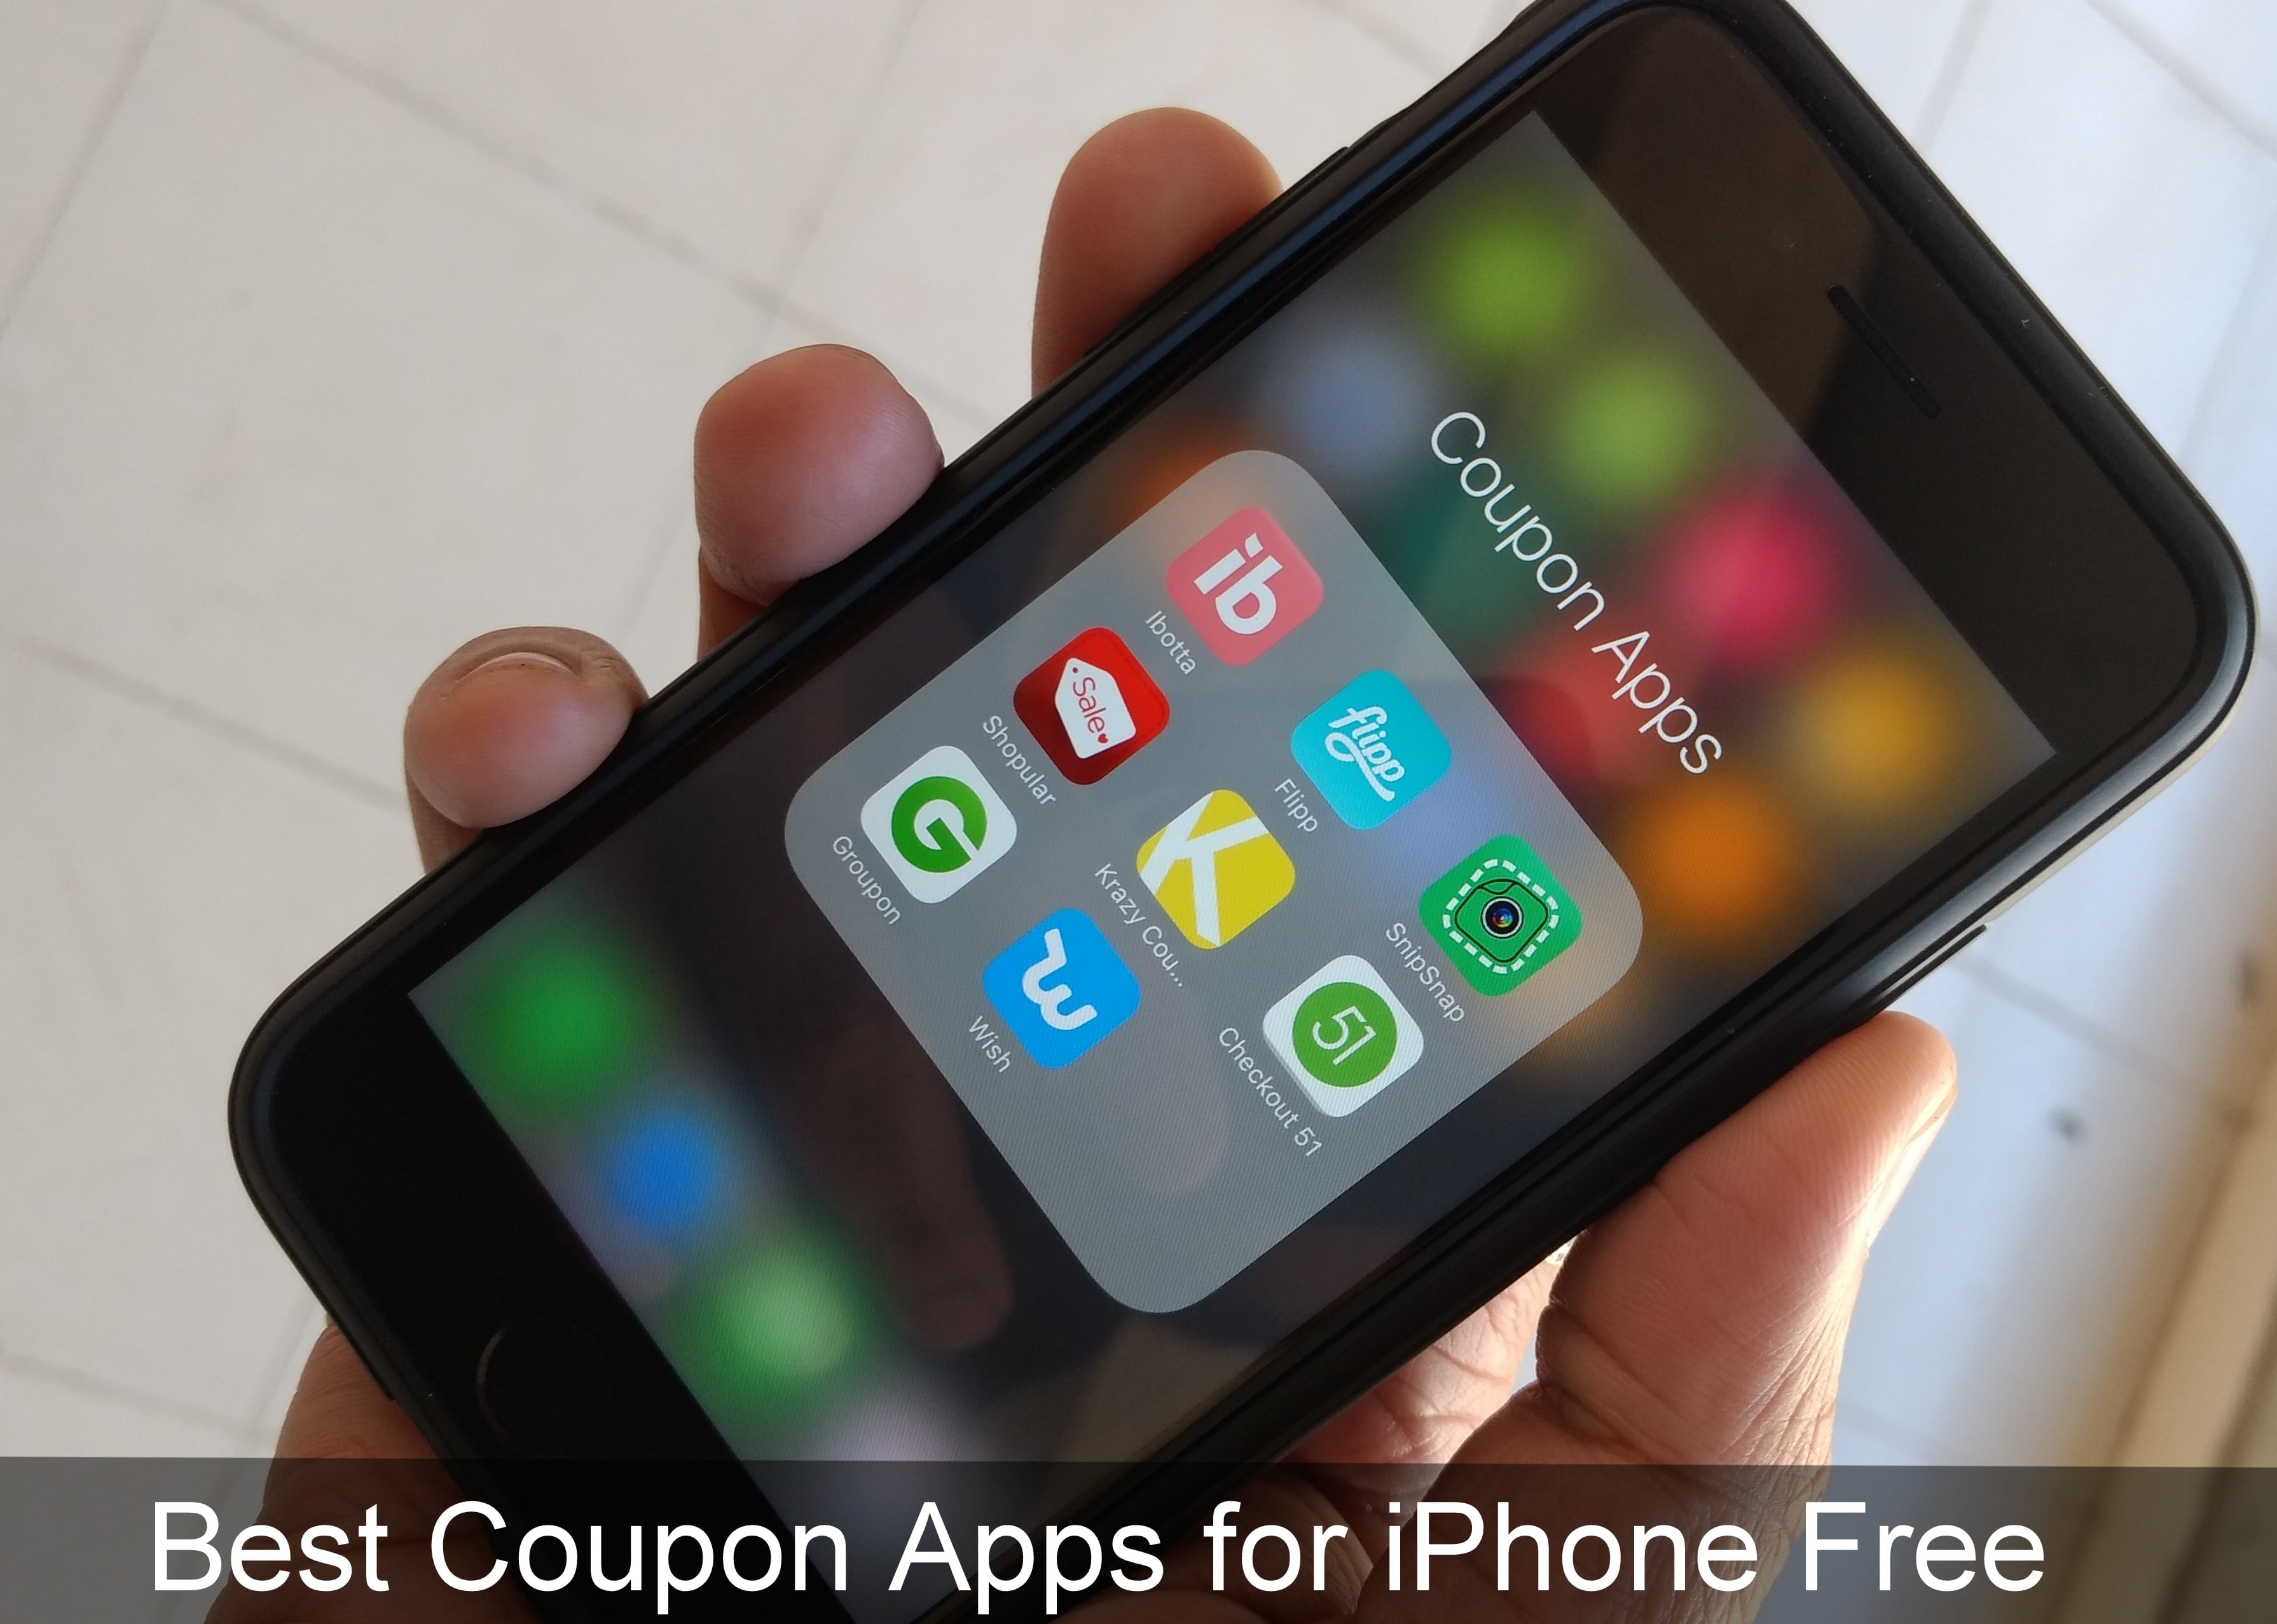 10 Best Coupon Apps for iPhone to save big Money 2017